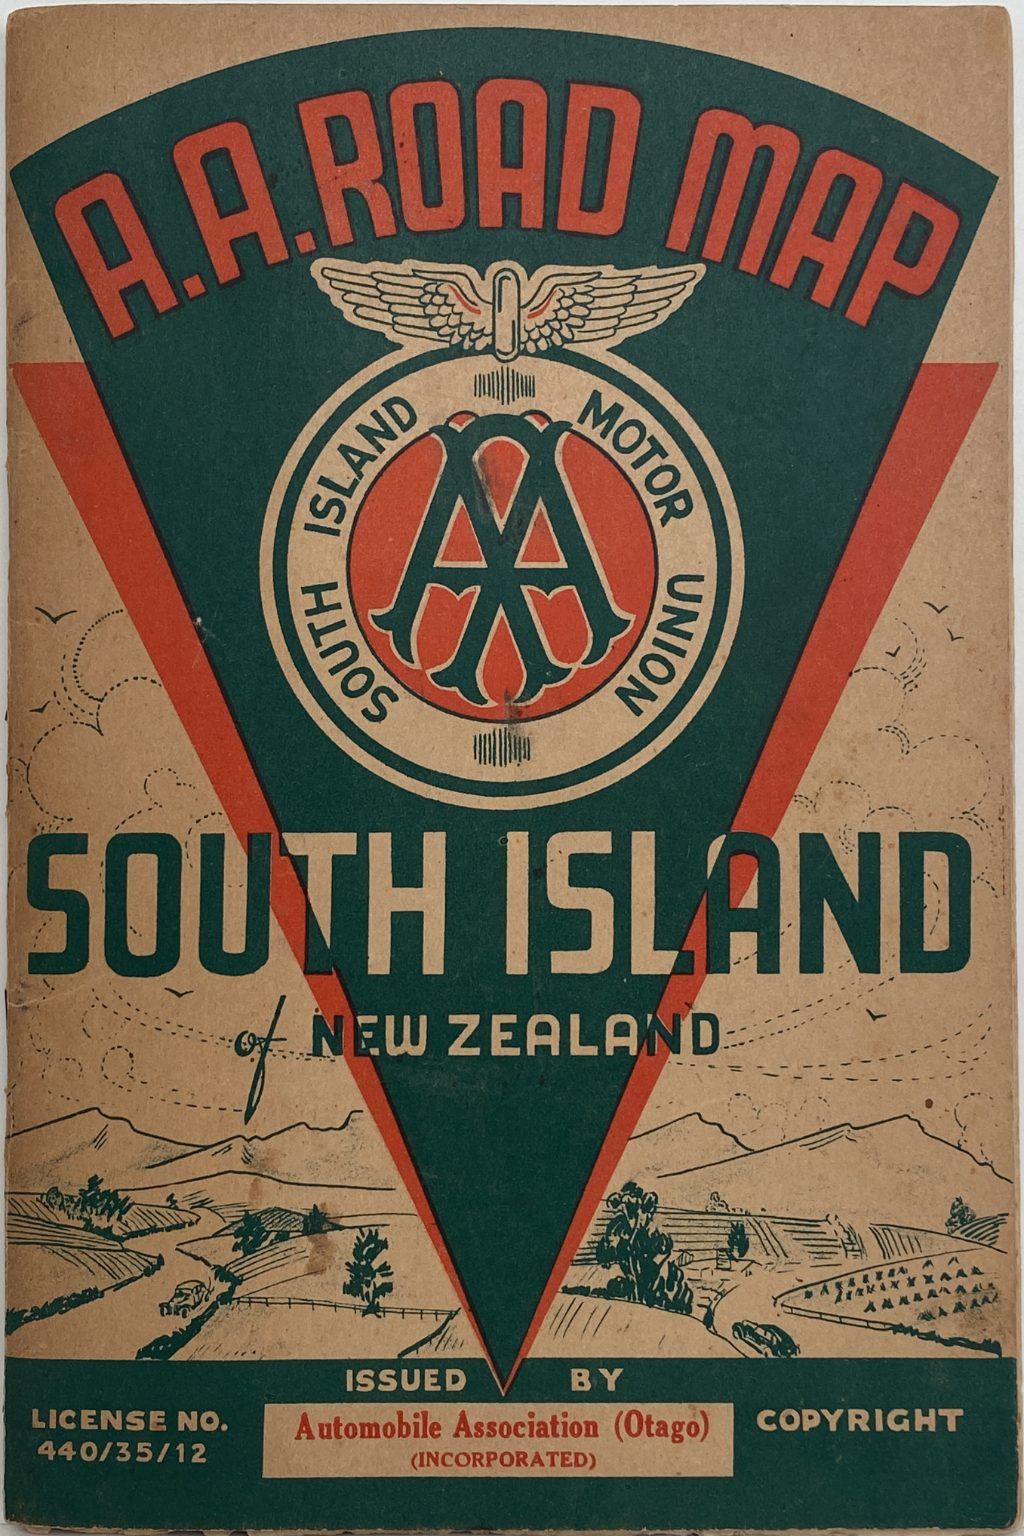 AA ROAD MAP: South Island of New Zealand